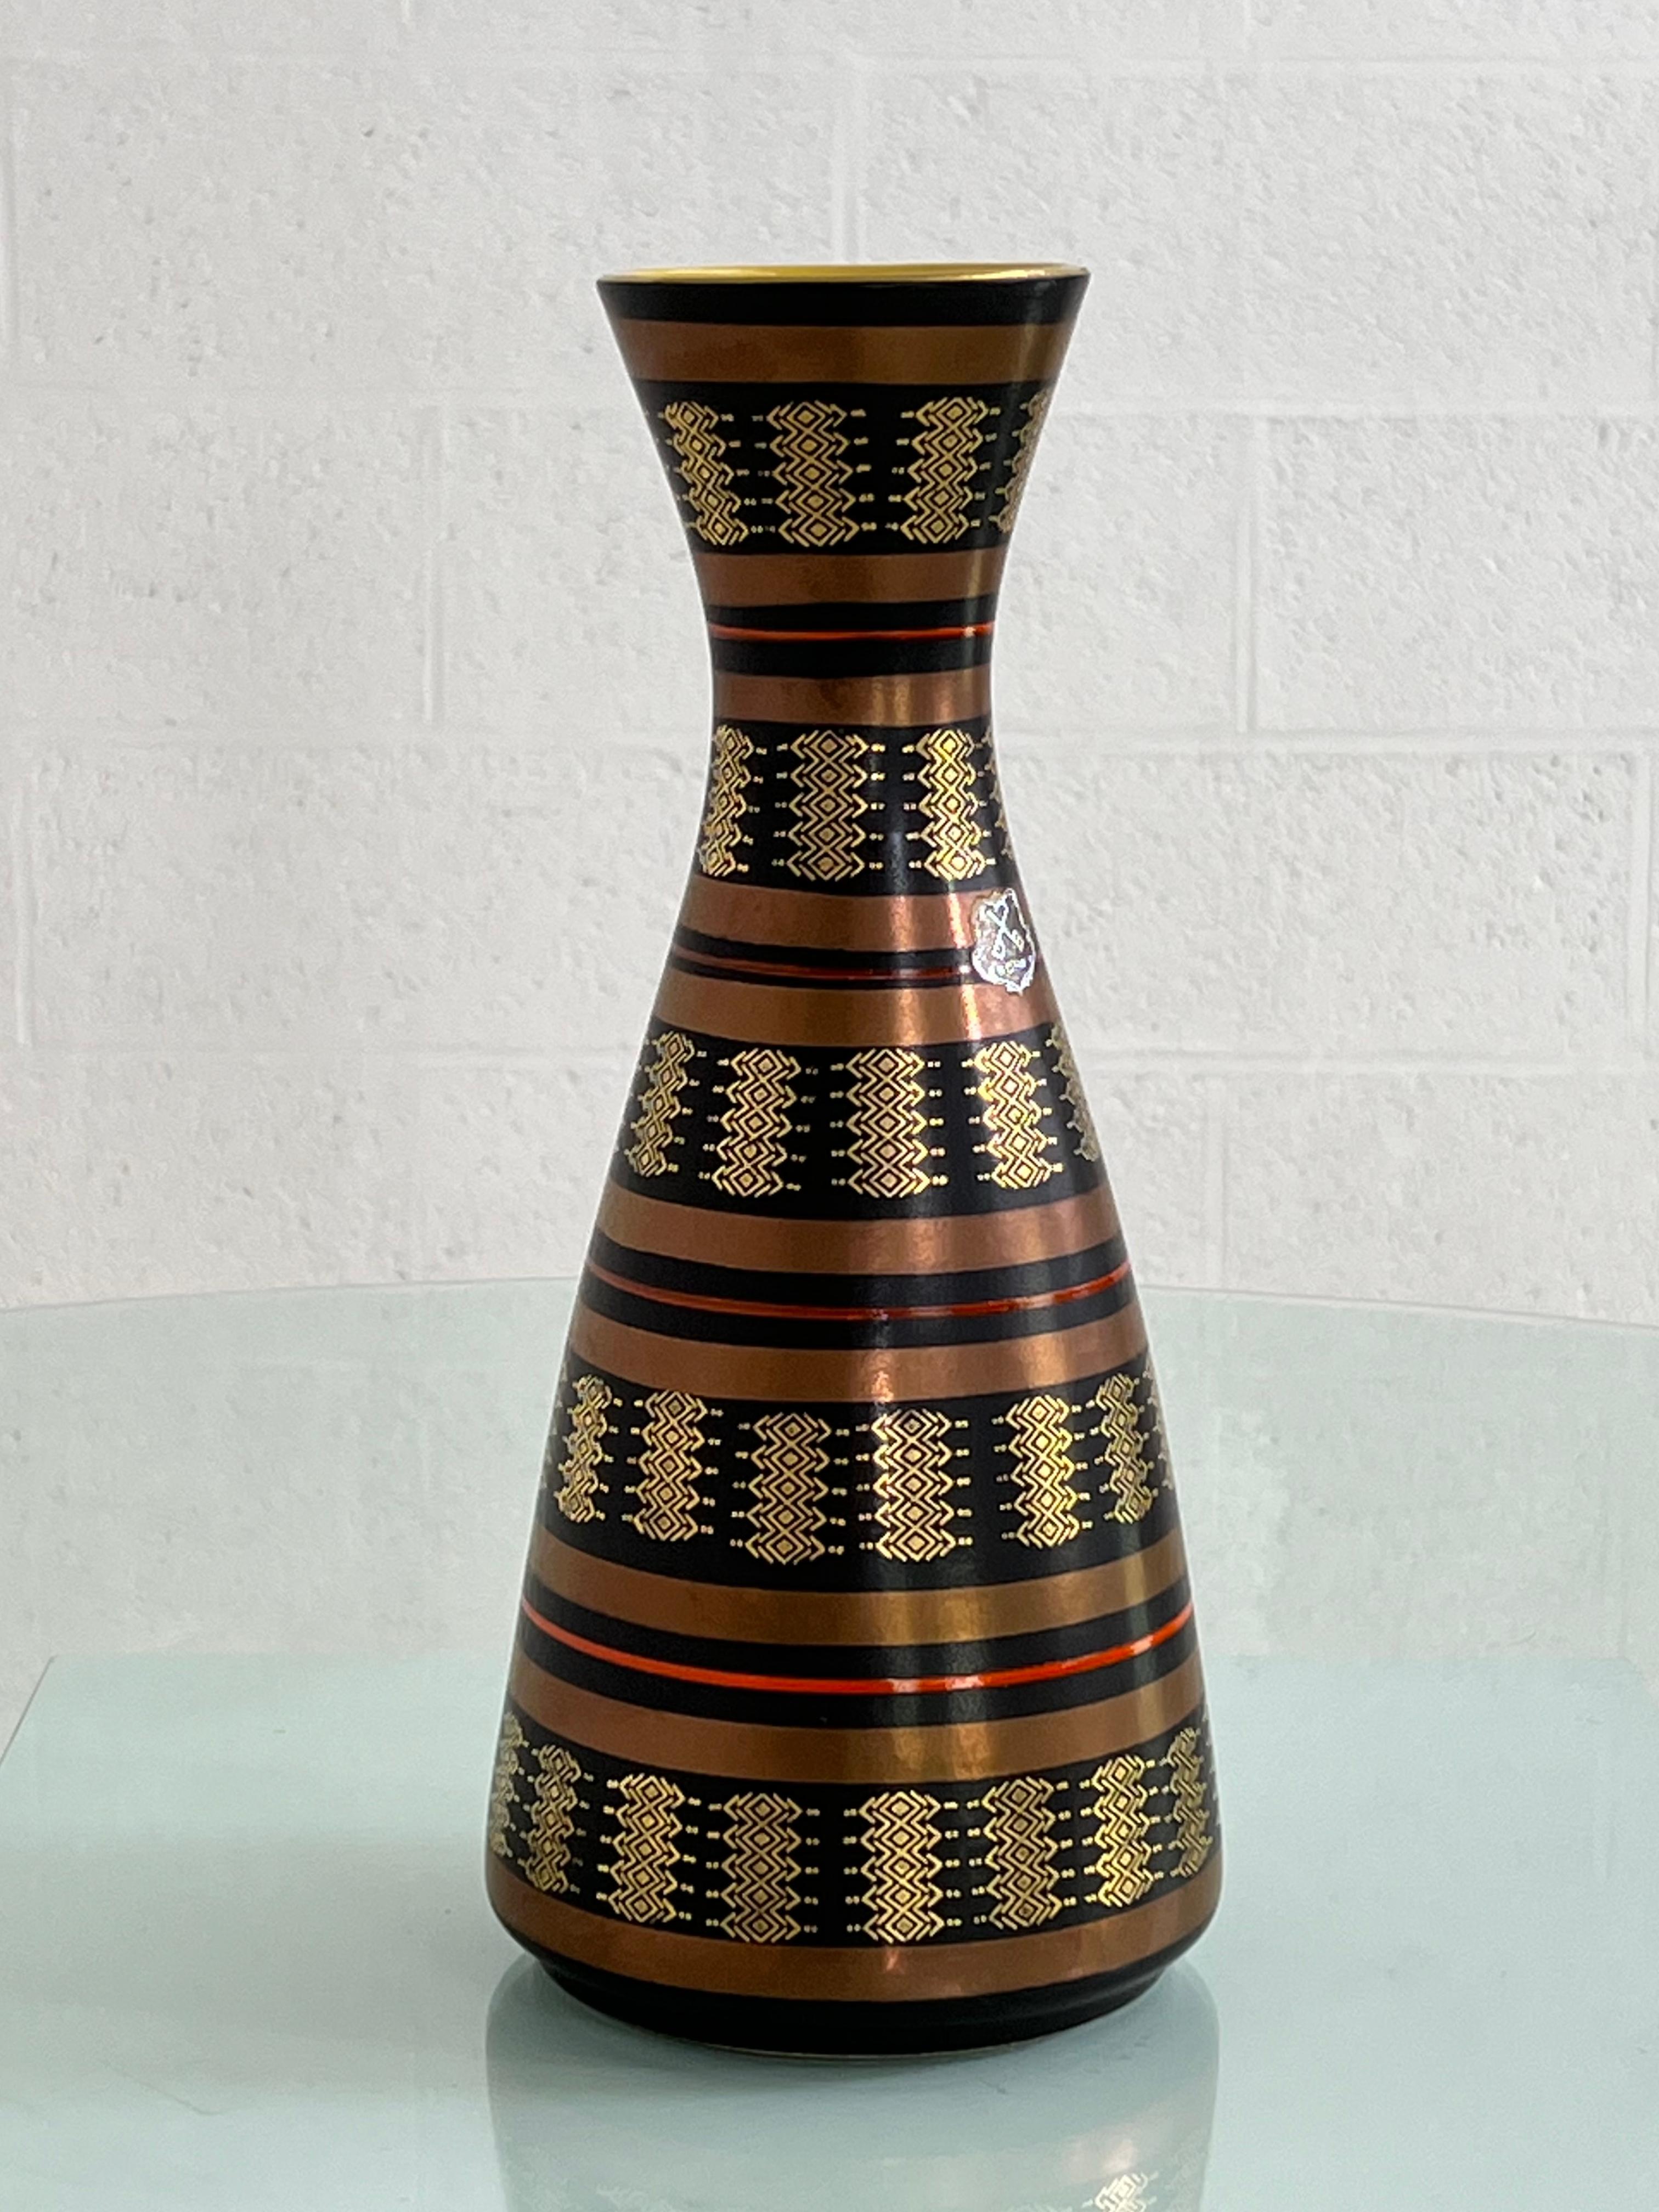 European 1960s West Germany Handmade Ceramic Vase Copper And Gold Color Finishes For Sale